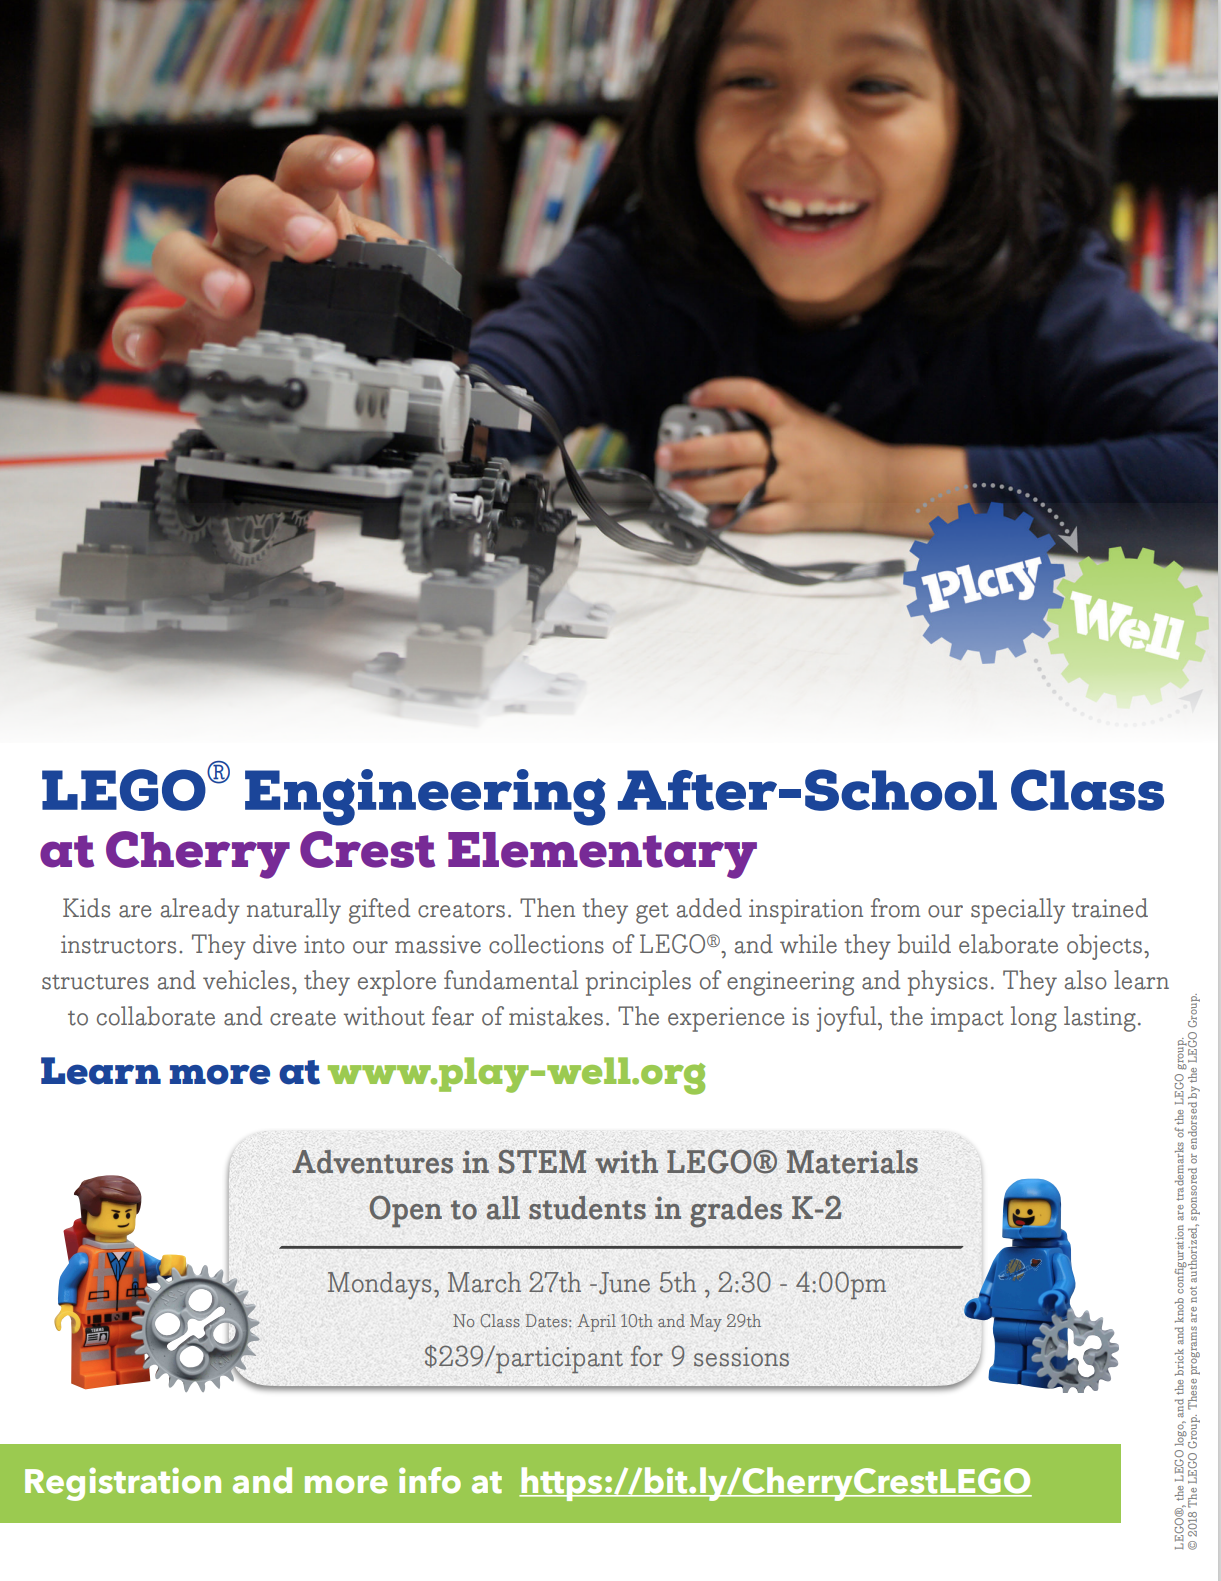 Playwell Lego starts 3/27 at Cherry Crest